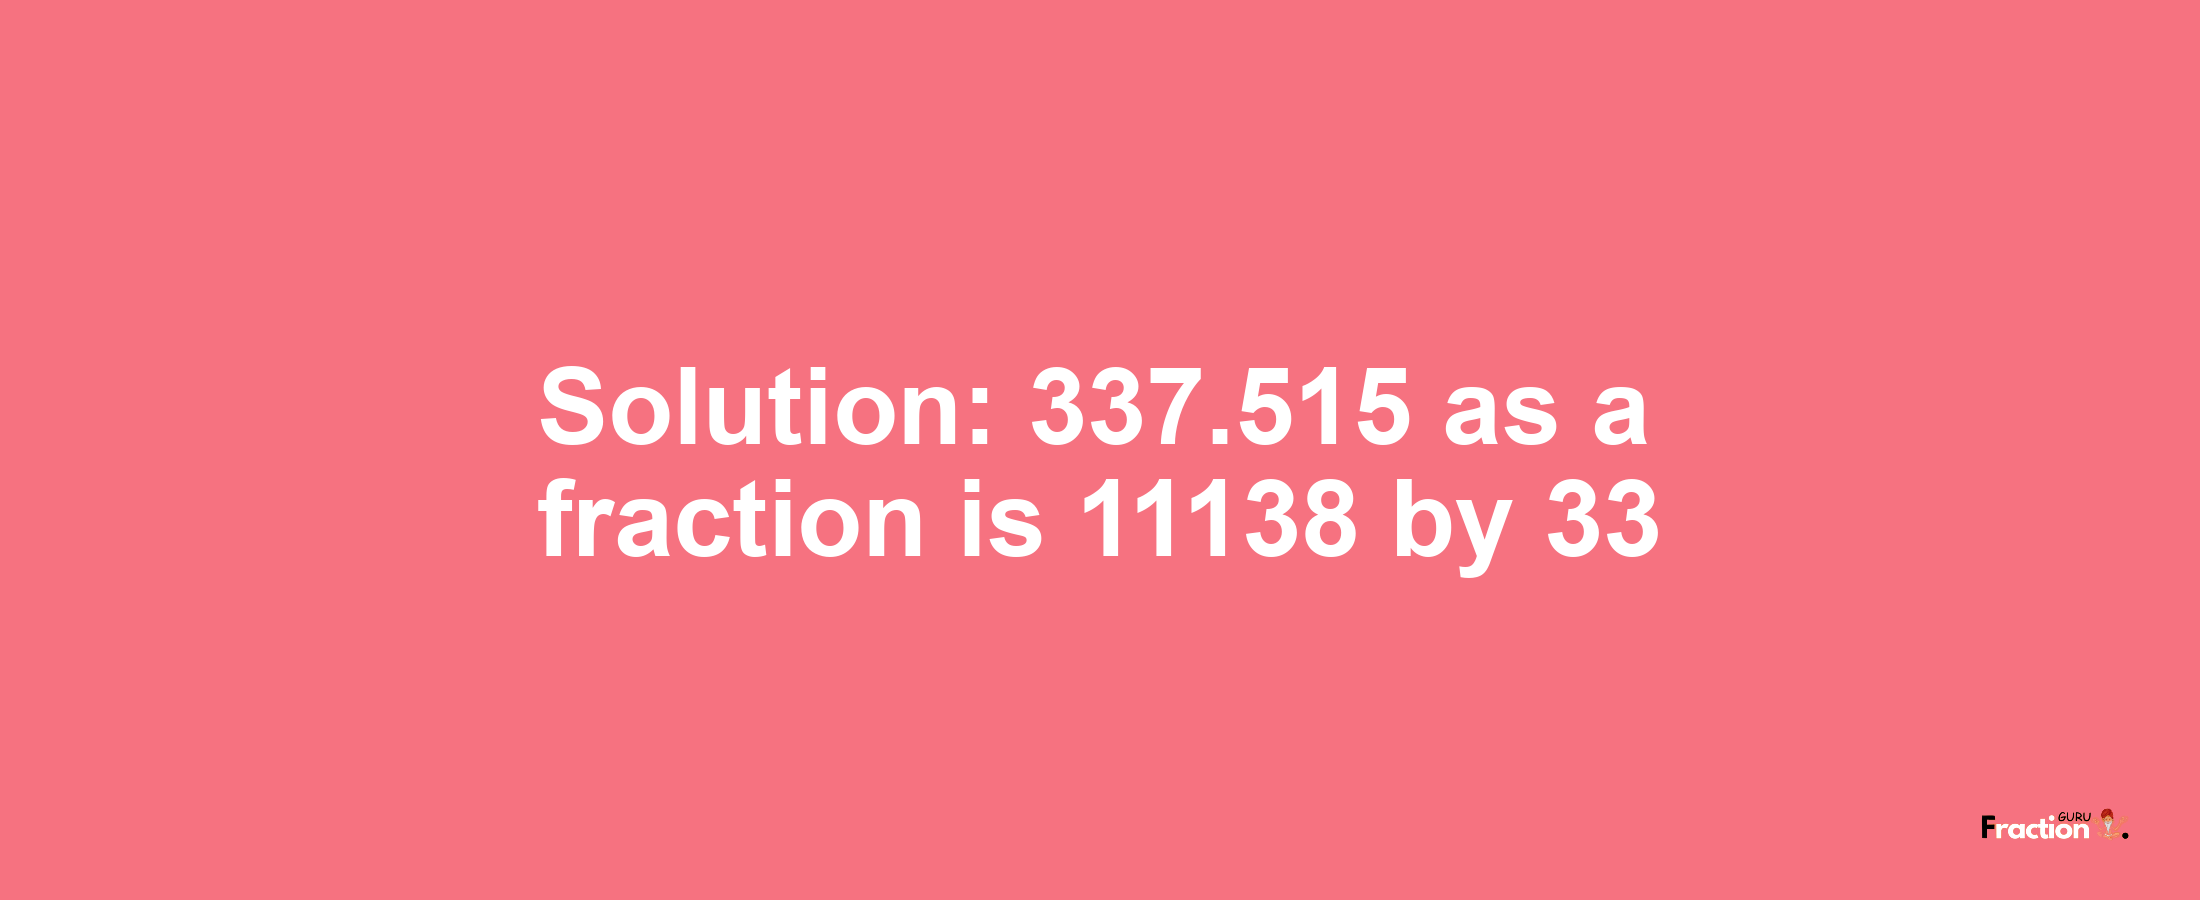 Solution:337.515 as a fraction is 11138/33